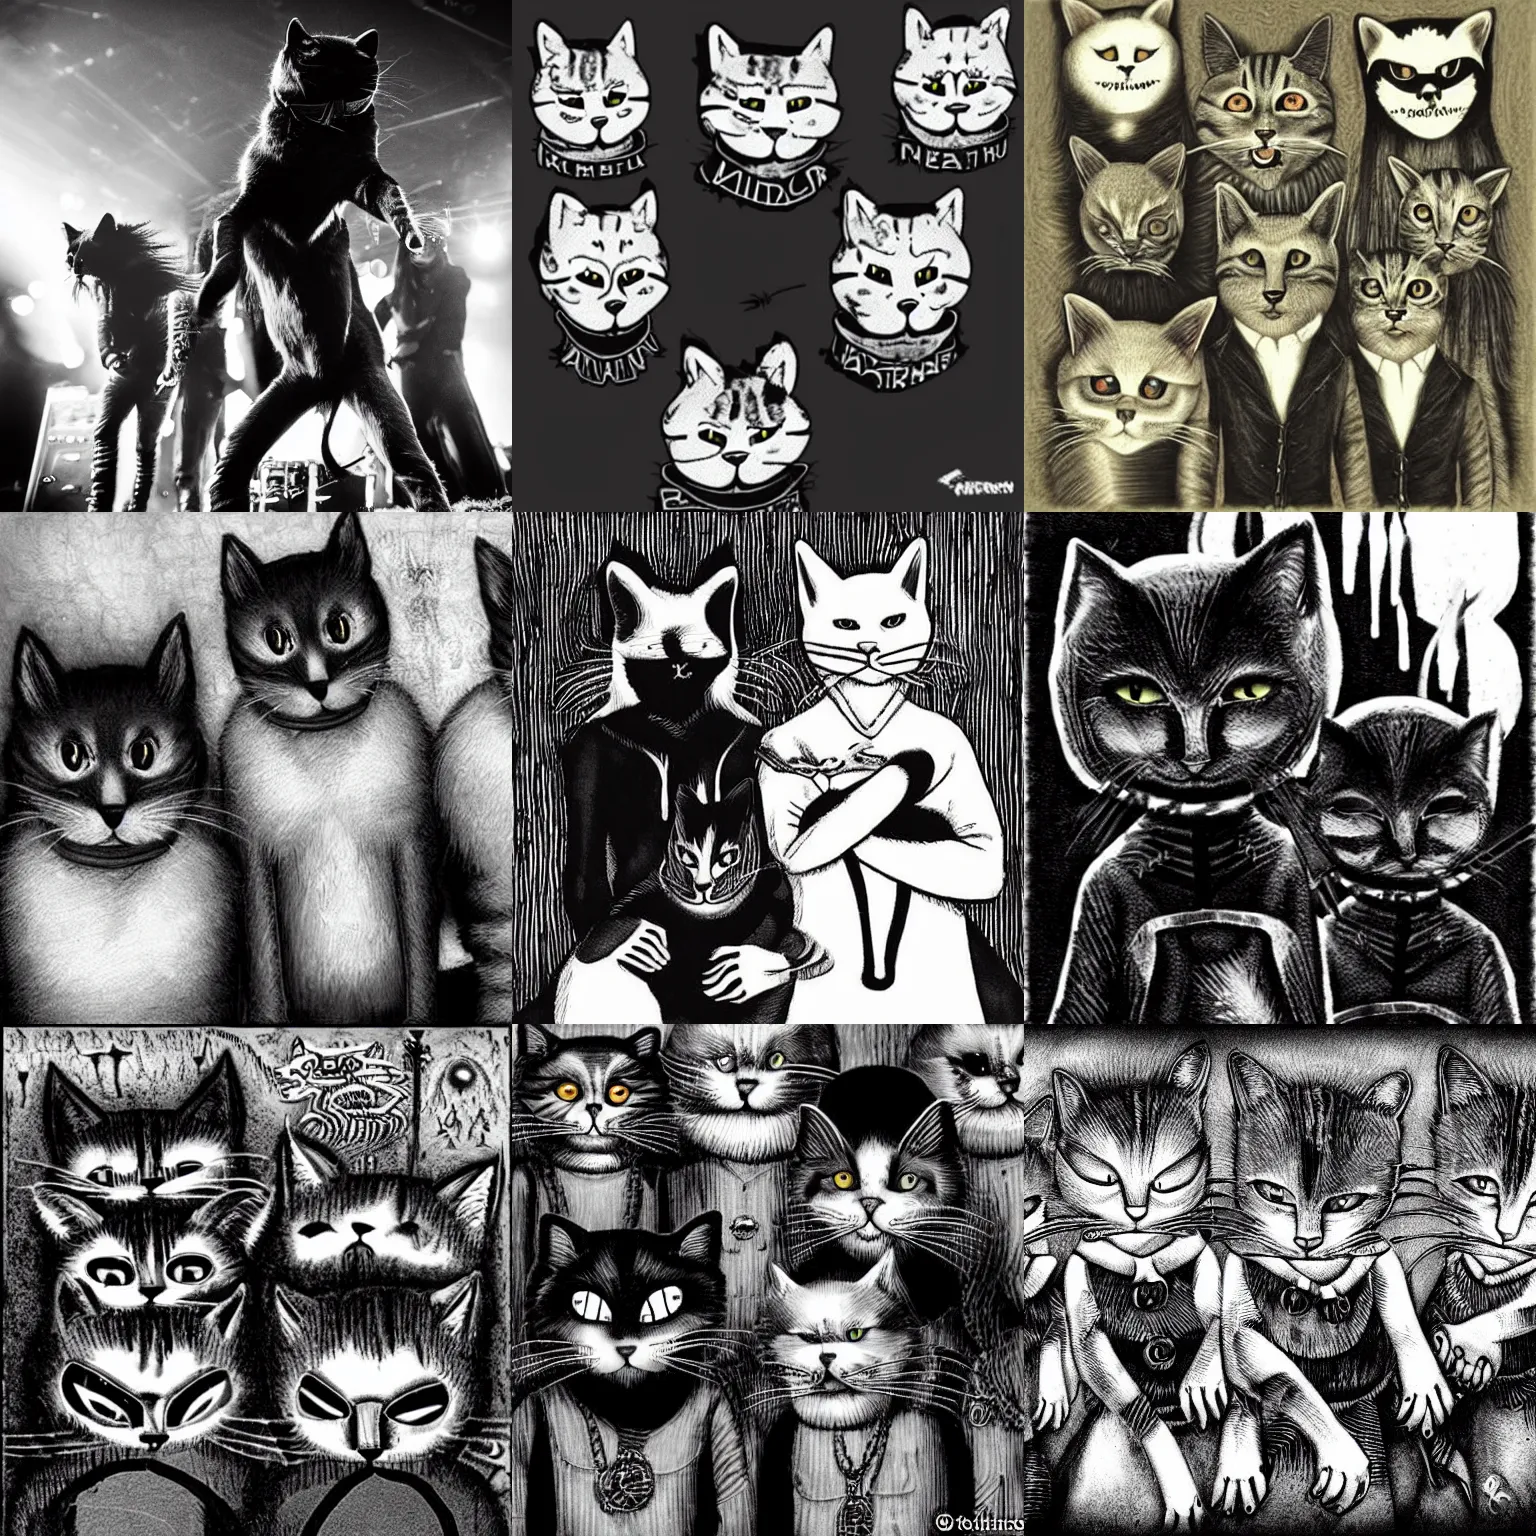 Prompt: Anthropomorphic cats in a black metal band